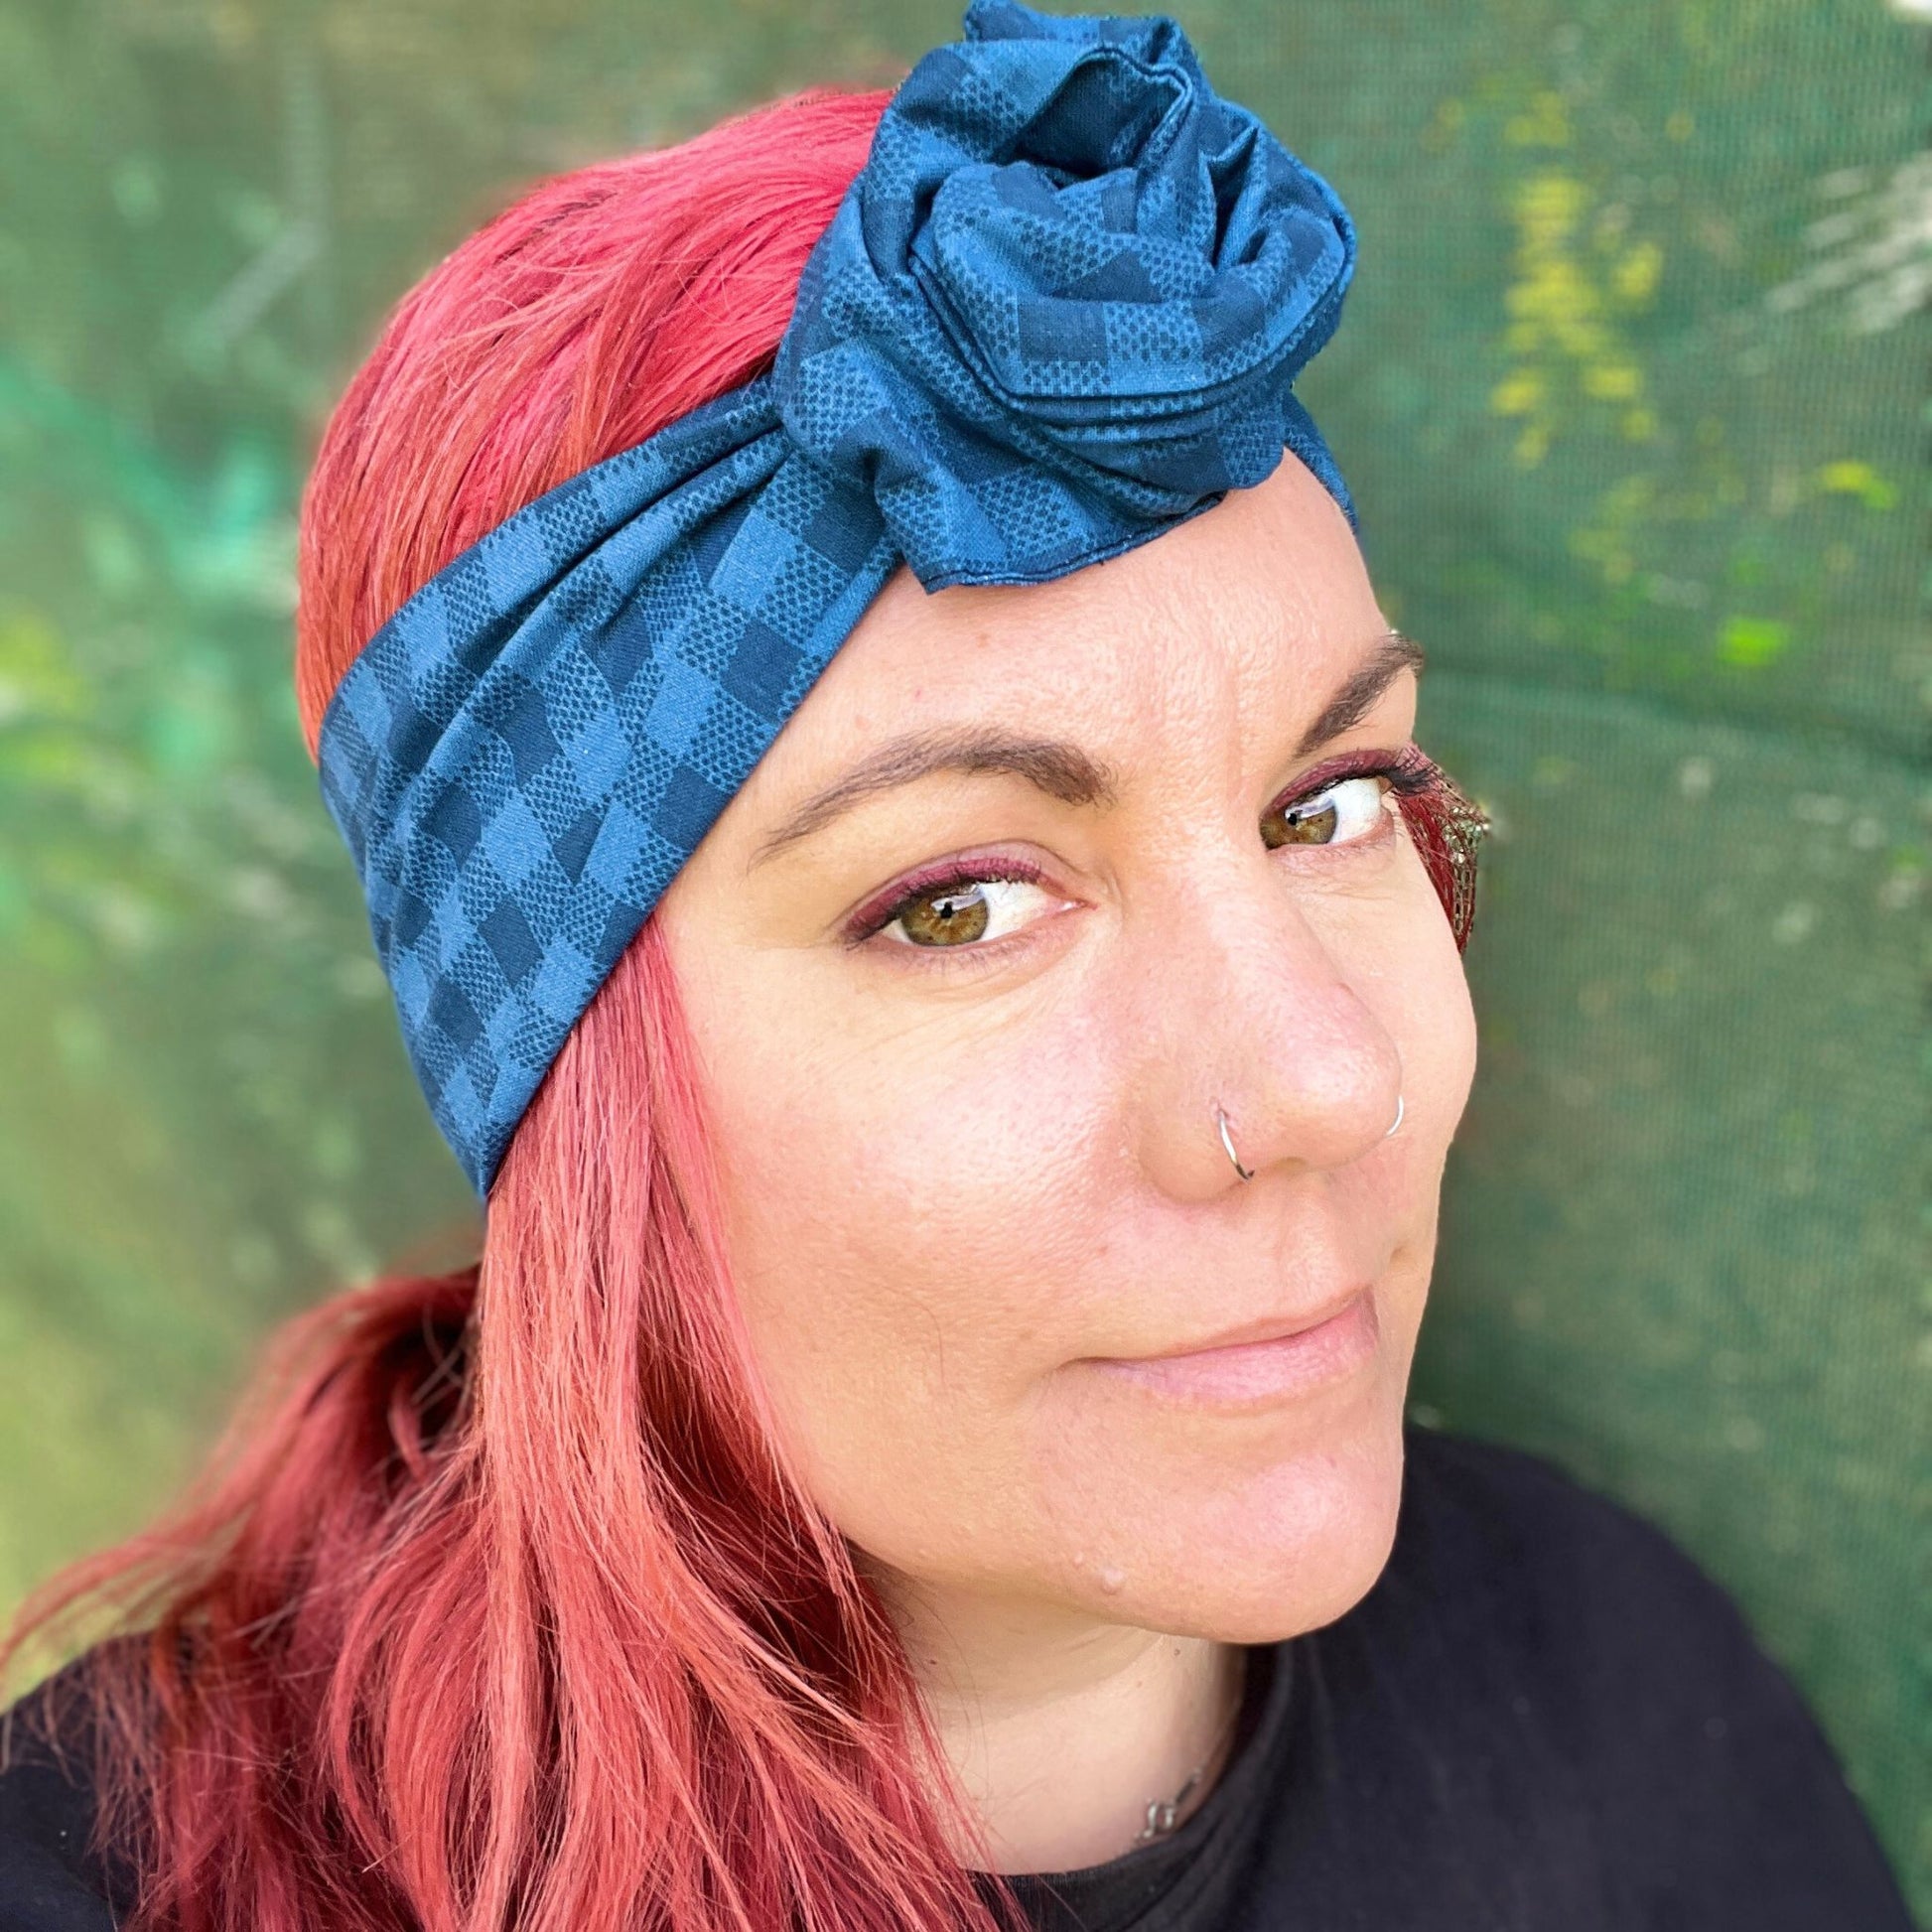 showcasing a stylish blue check-patterned wire headwrap. The headwrap features a knotted bow on the top, adding a playful twist to the design. Her vibrant red hair peeks out beneath the headwrap, creating a striking contrast against the blue. 